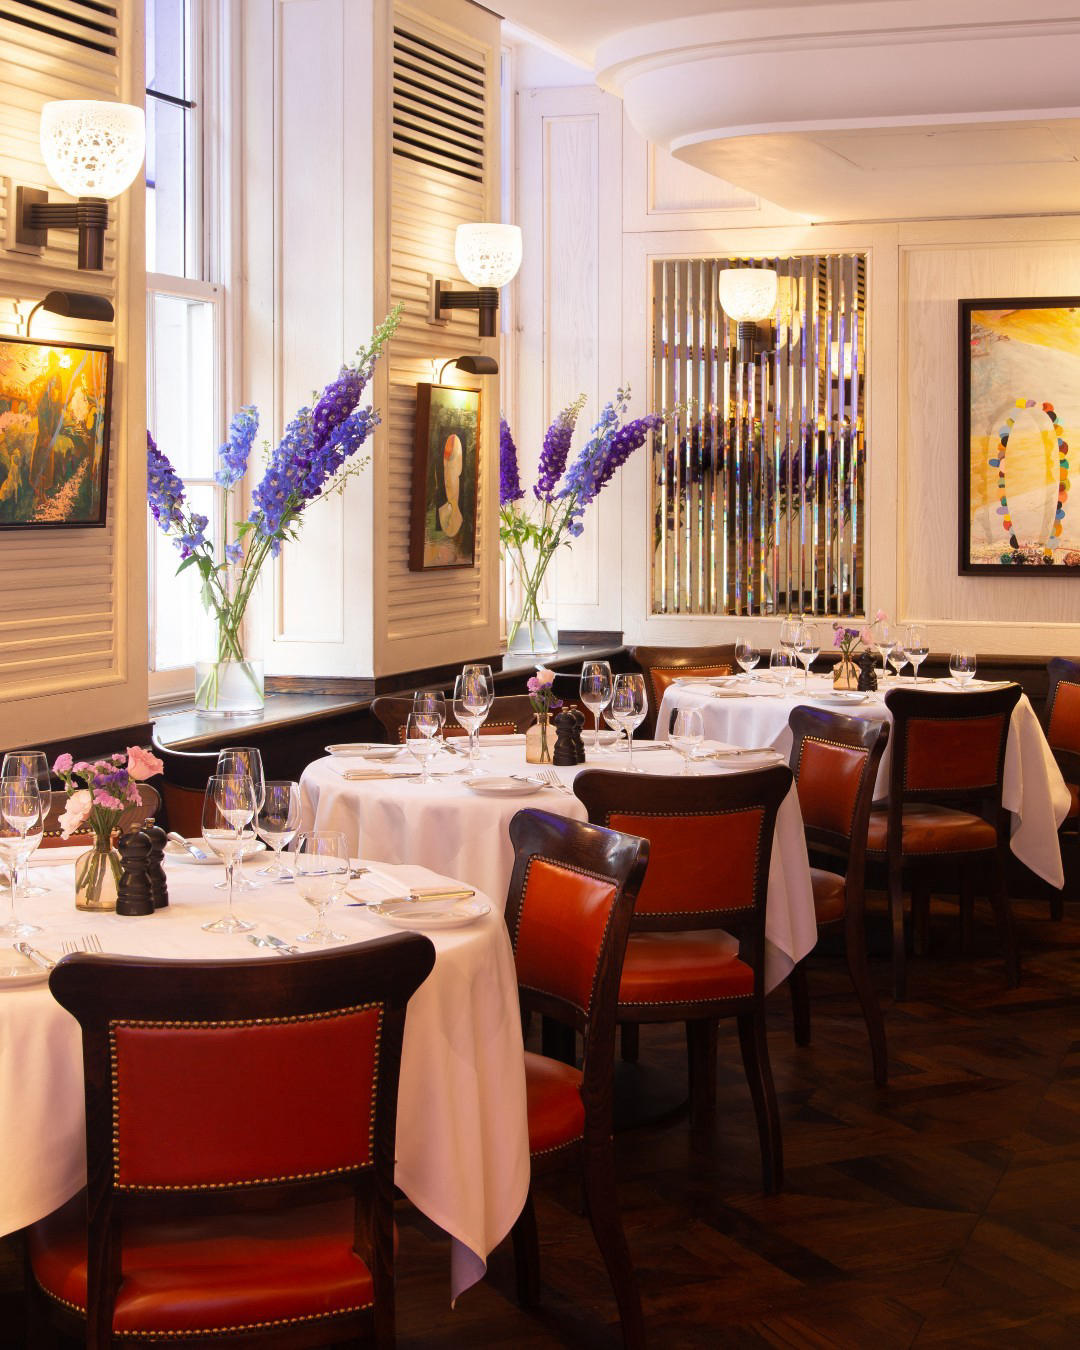 image  1 34 Mayfair - Join us for lunch or dinner at 34 Mayfair, and enjoy delicious menus as well as art-dec